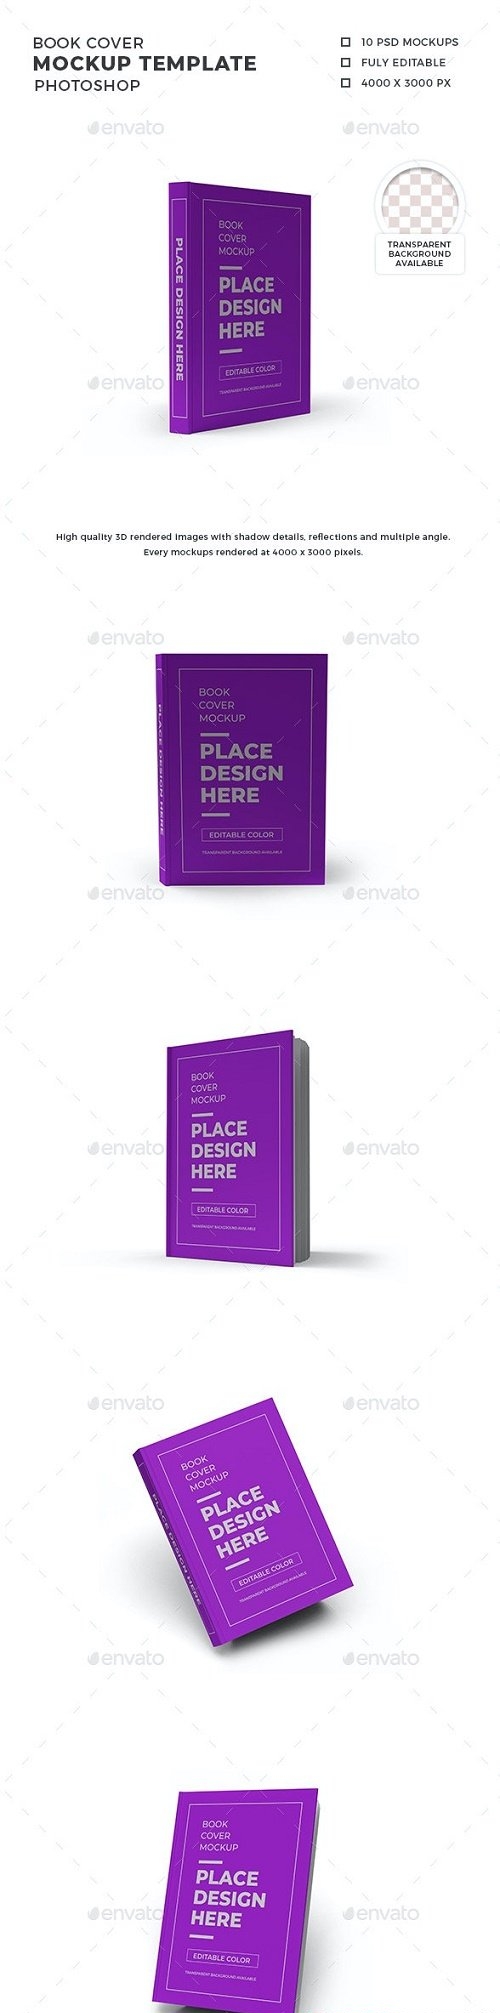 Book Cover Mockup Template Set - 30263942